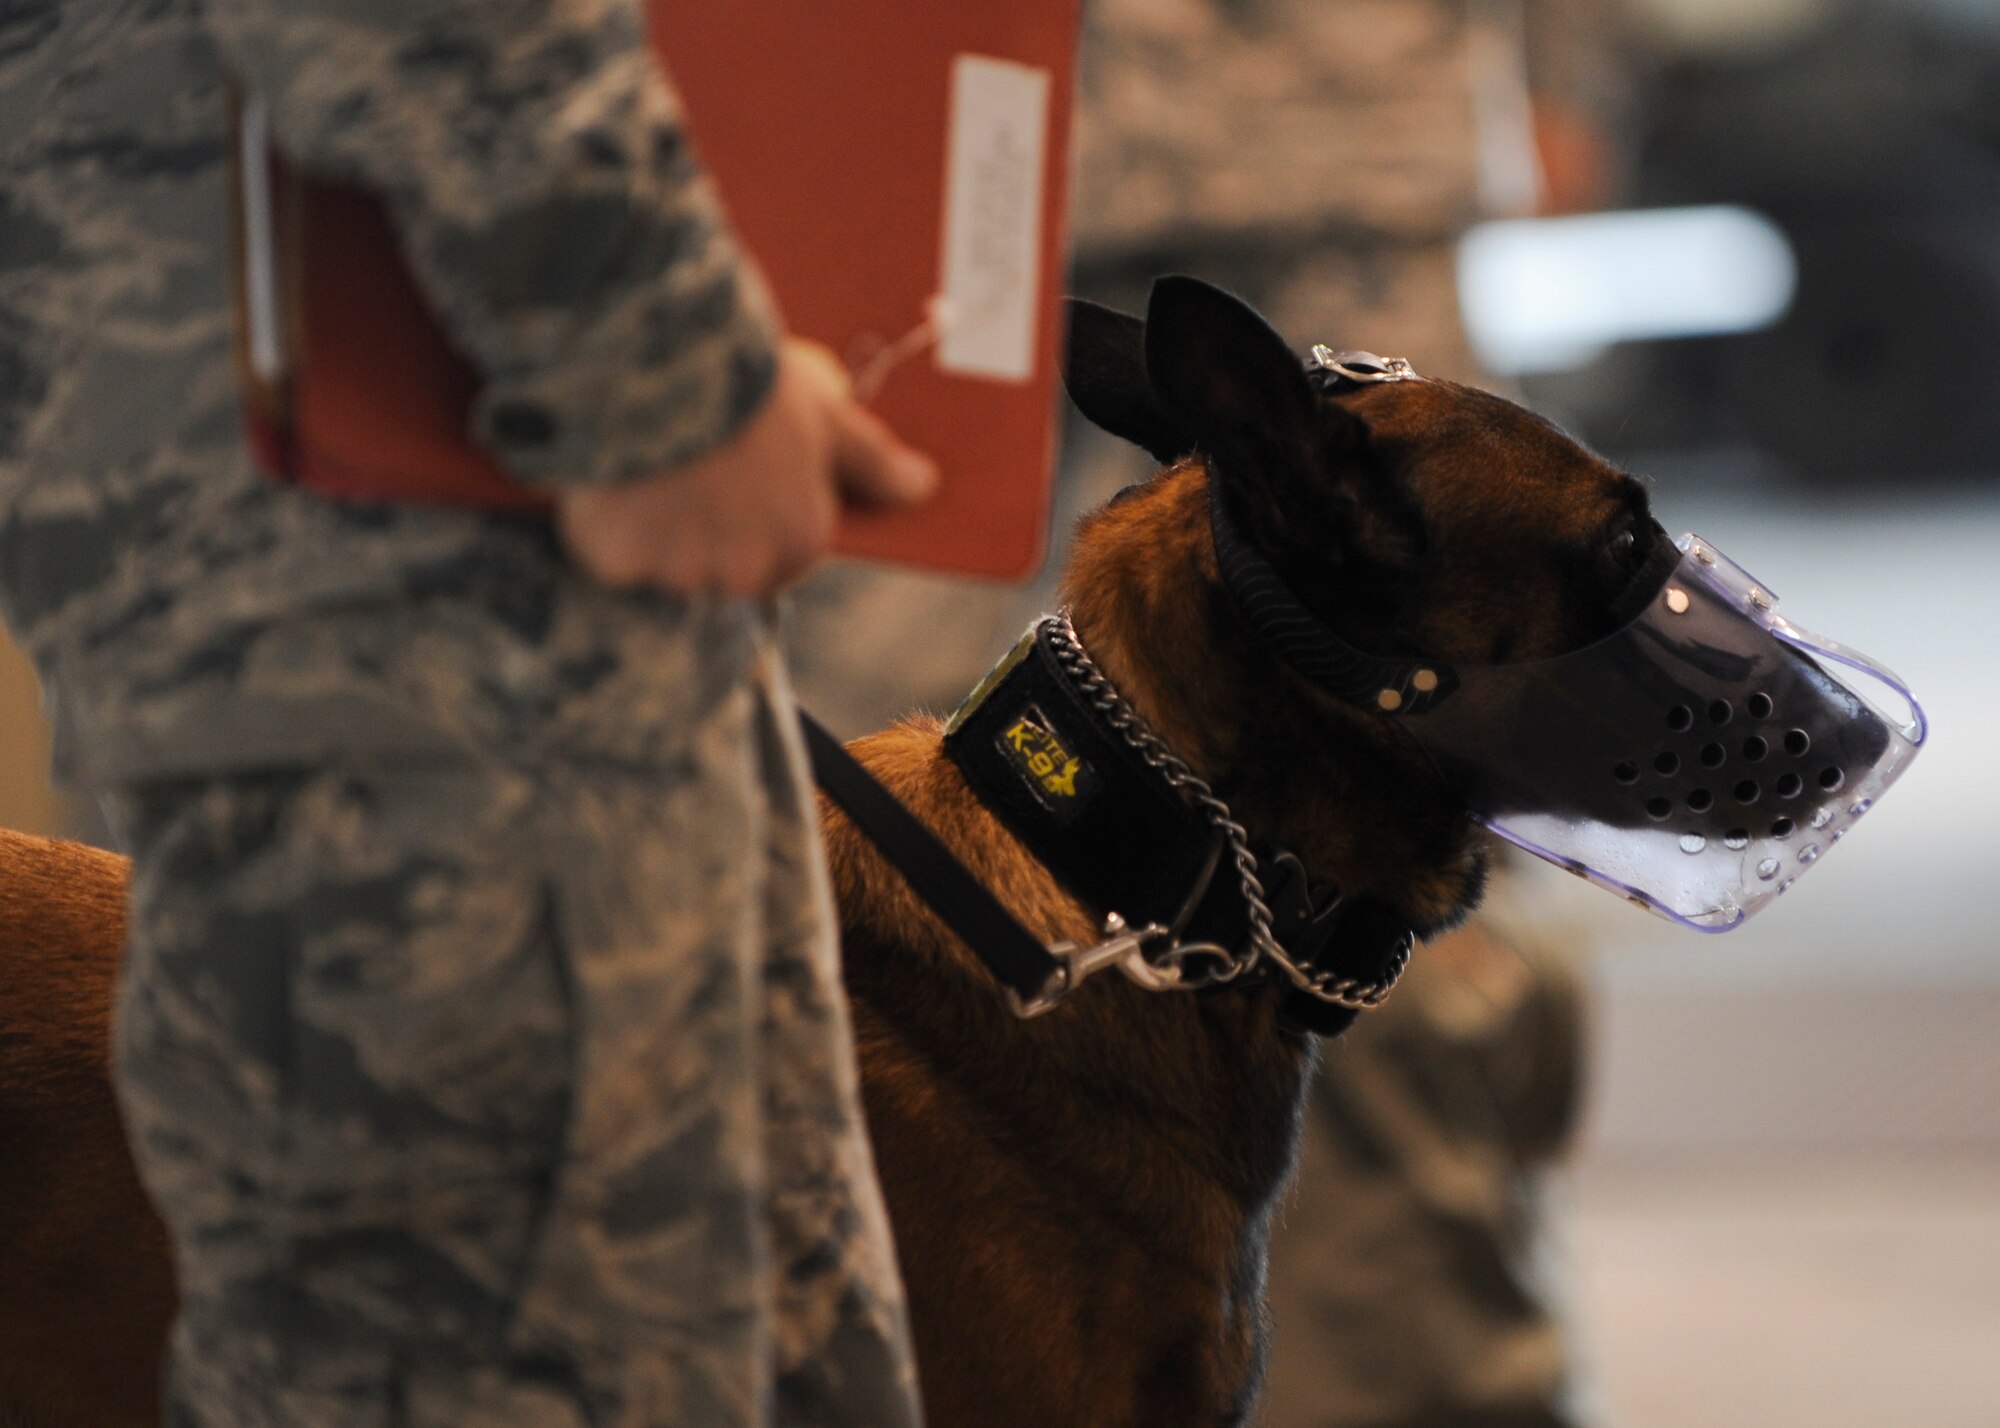 A military working dog waits to go through the personnel deployment function (PDF) line with his handler during Exercise Global Thunder 17 (GT17) at Whiteman Air Force Base, Mo., Oct. 26, 2016. The PDF line consists of representatives from different base agencies who ensure deploying personnel are properly accounted for and prepared to deploy. GT17 is an annual command and control exercise designed to train U.S. Strategic Command forces and assess joint operational readiness. (U.S. Air Force by Senior Airman Danielle Quilla)